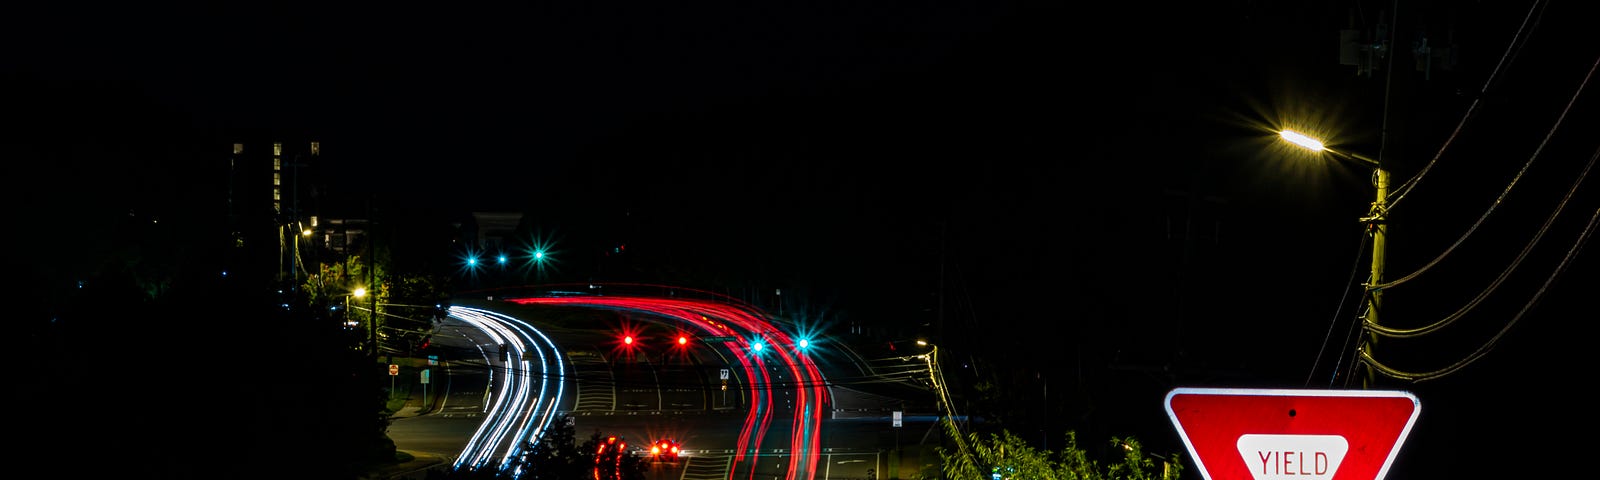 A photo at night of a yield sign near a busy highway.